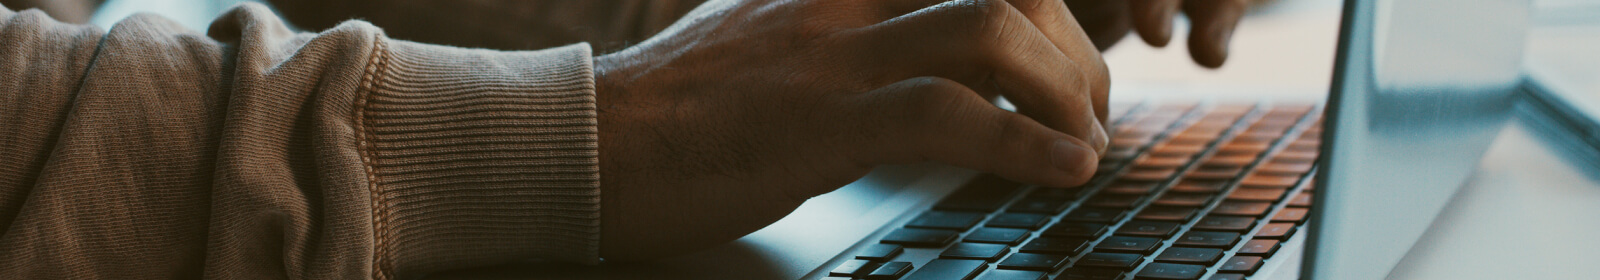 Close up of a person's hands using a laptop keyboard